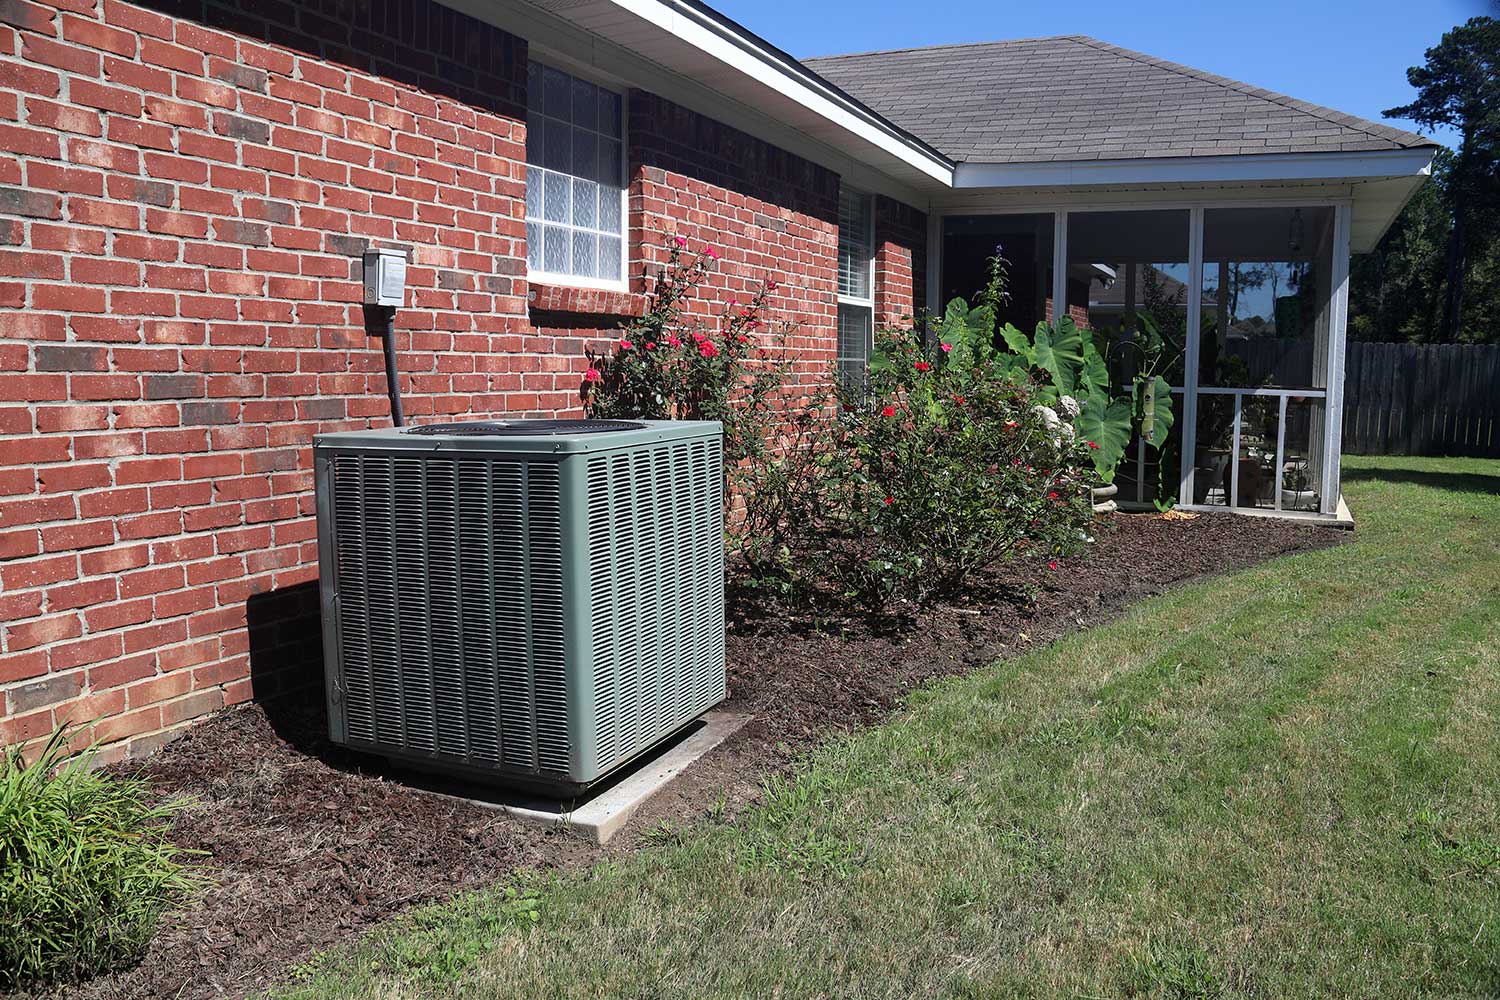 Using a heat pump to entirely switch from heating to cooling